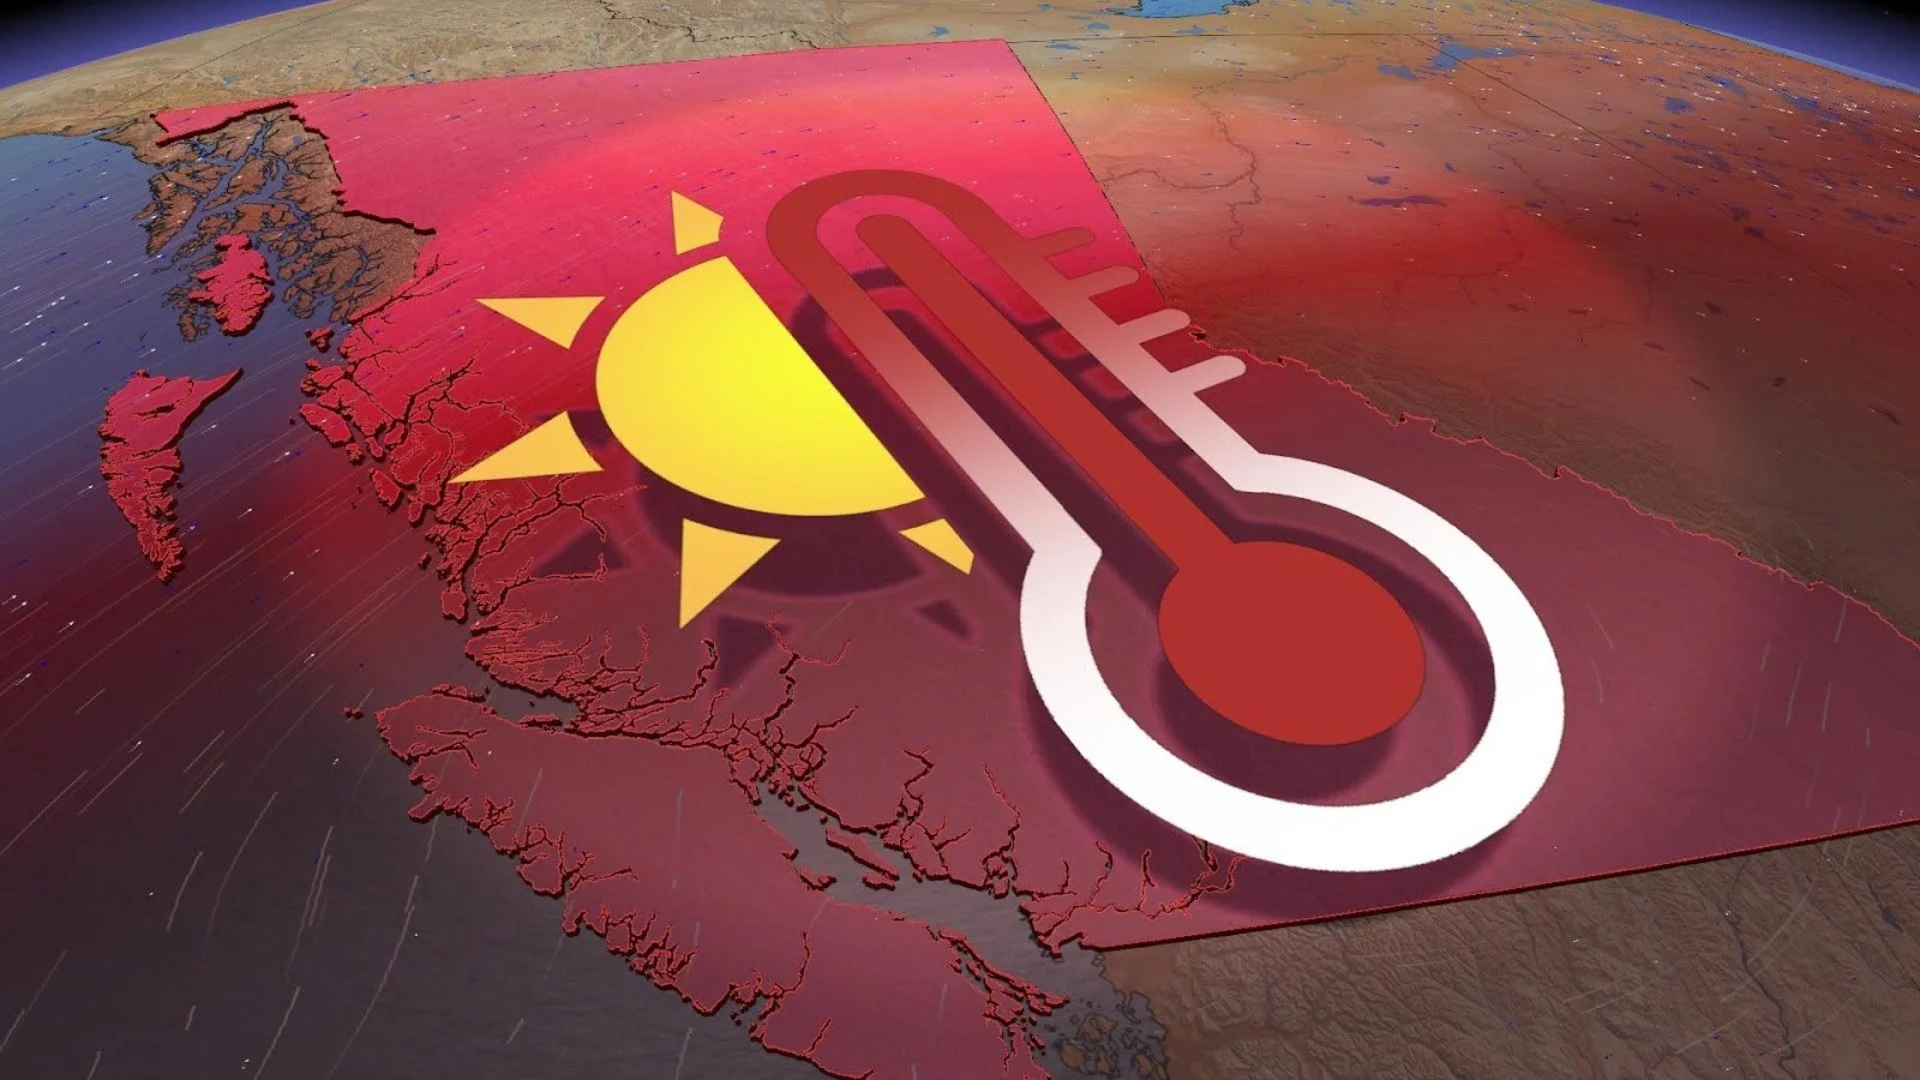 A ridge building over B.C. will bring the heat soon. Some areas may see 30 degrees by this time next weekend